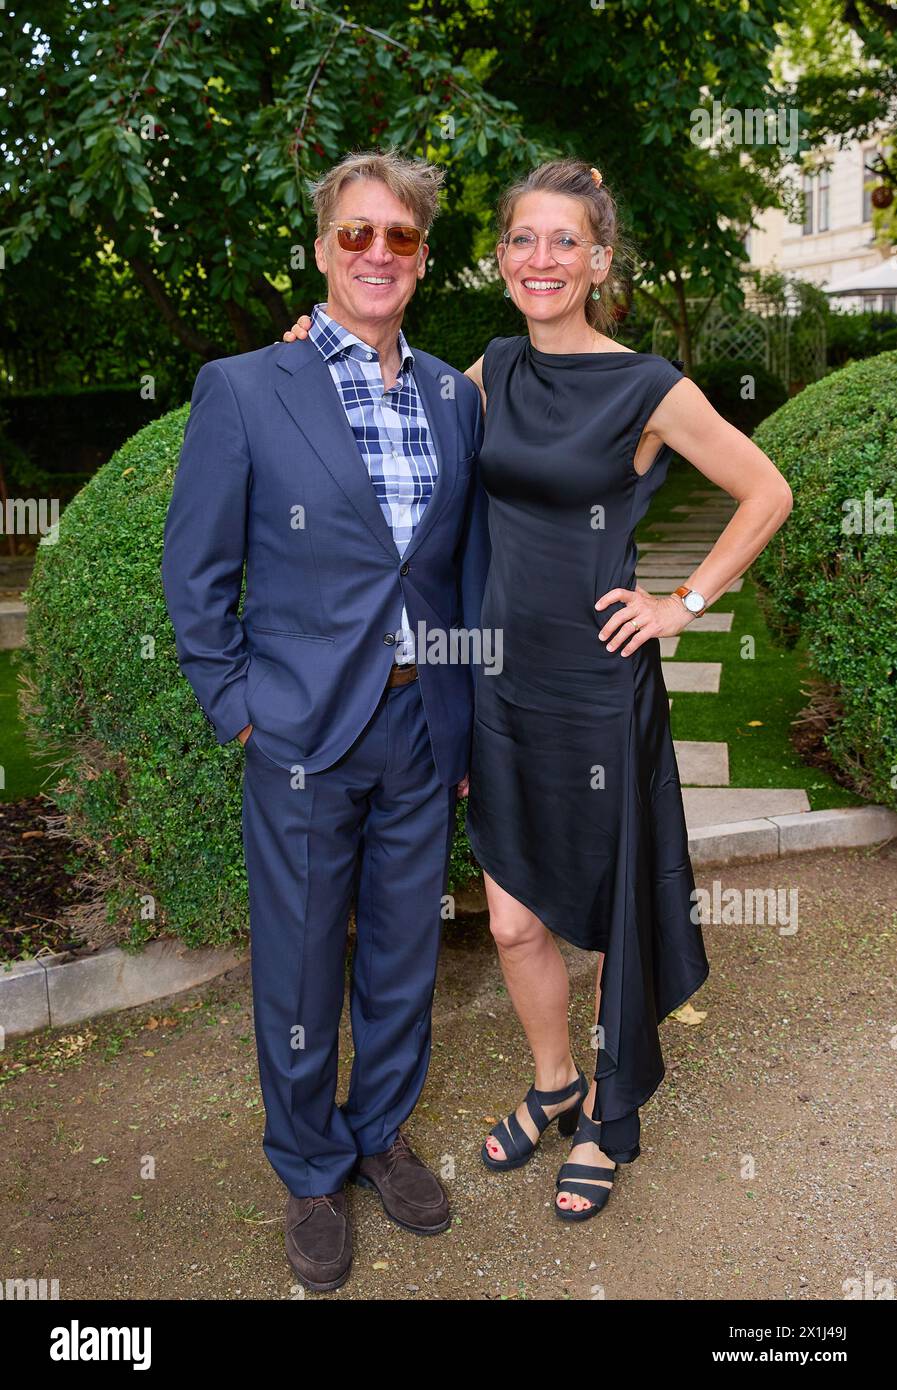 Austrian actor Tobias MORETTI with his wife Julia were honored as Feinschmecker des Jahres 2021 by Gault & Millau at Palais Coburg in Vienna, Austria, on June 24, 2021. - 20210624 PD14081 - Rechteinfo: Rights Managed (RM) Stock Photo